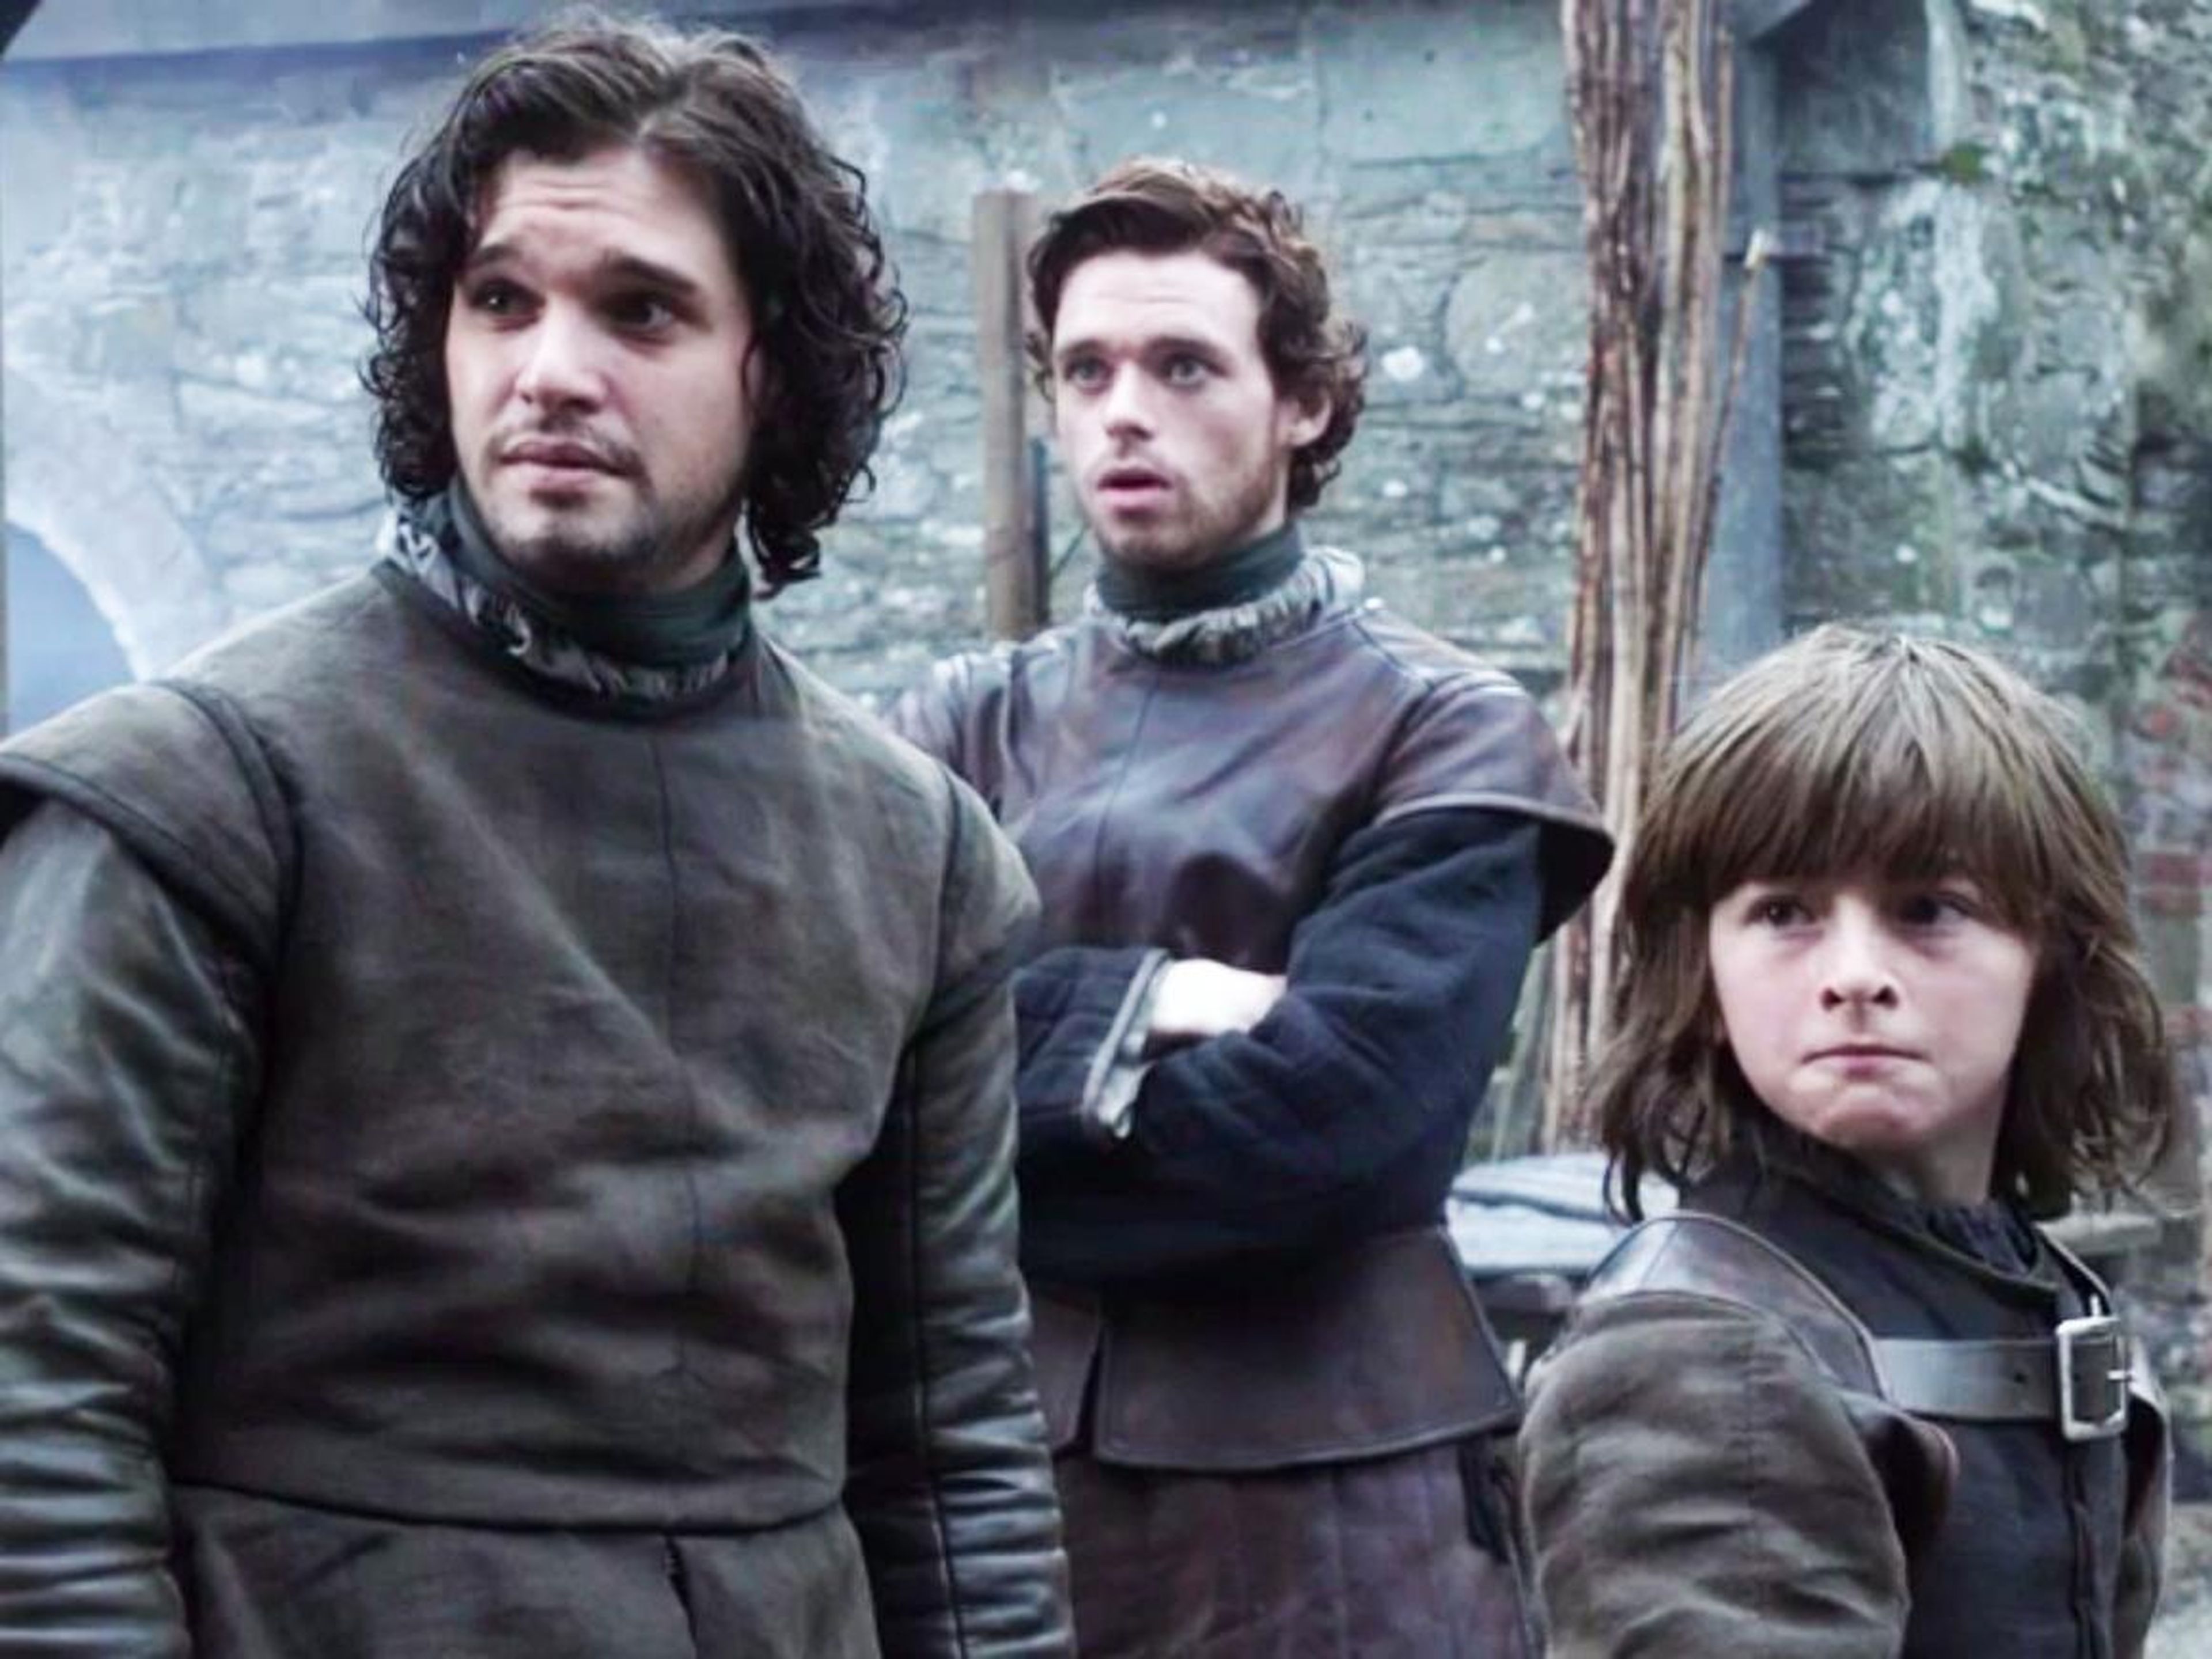 Jon Snow, Robb Stark, and Bran Stark on the first episode of "Game of Thrones."